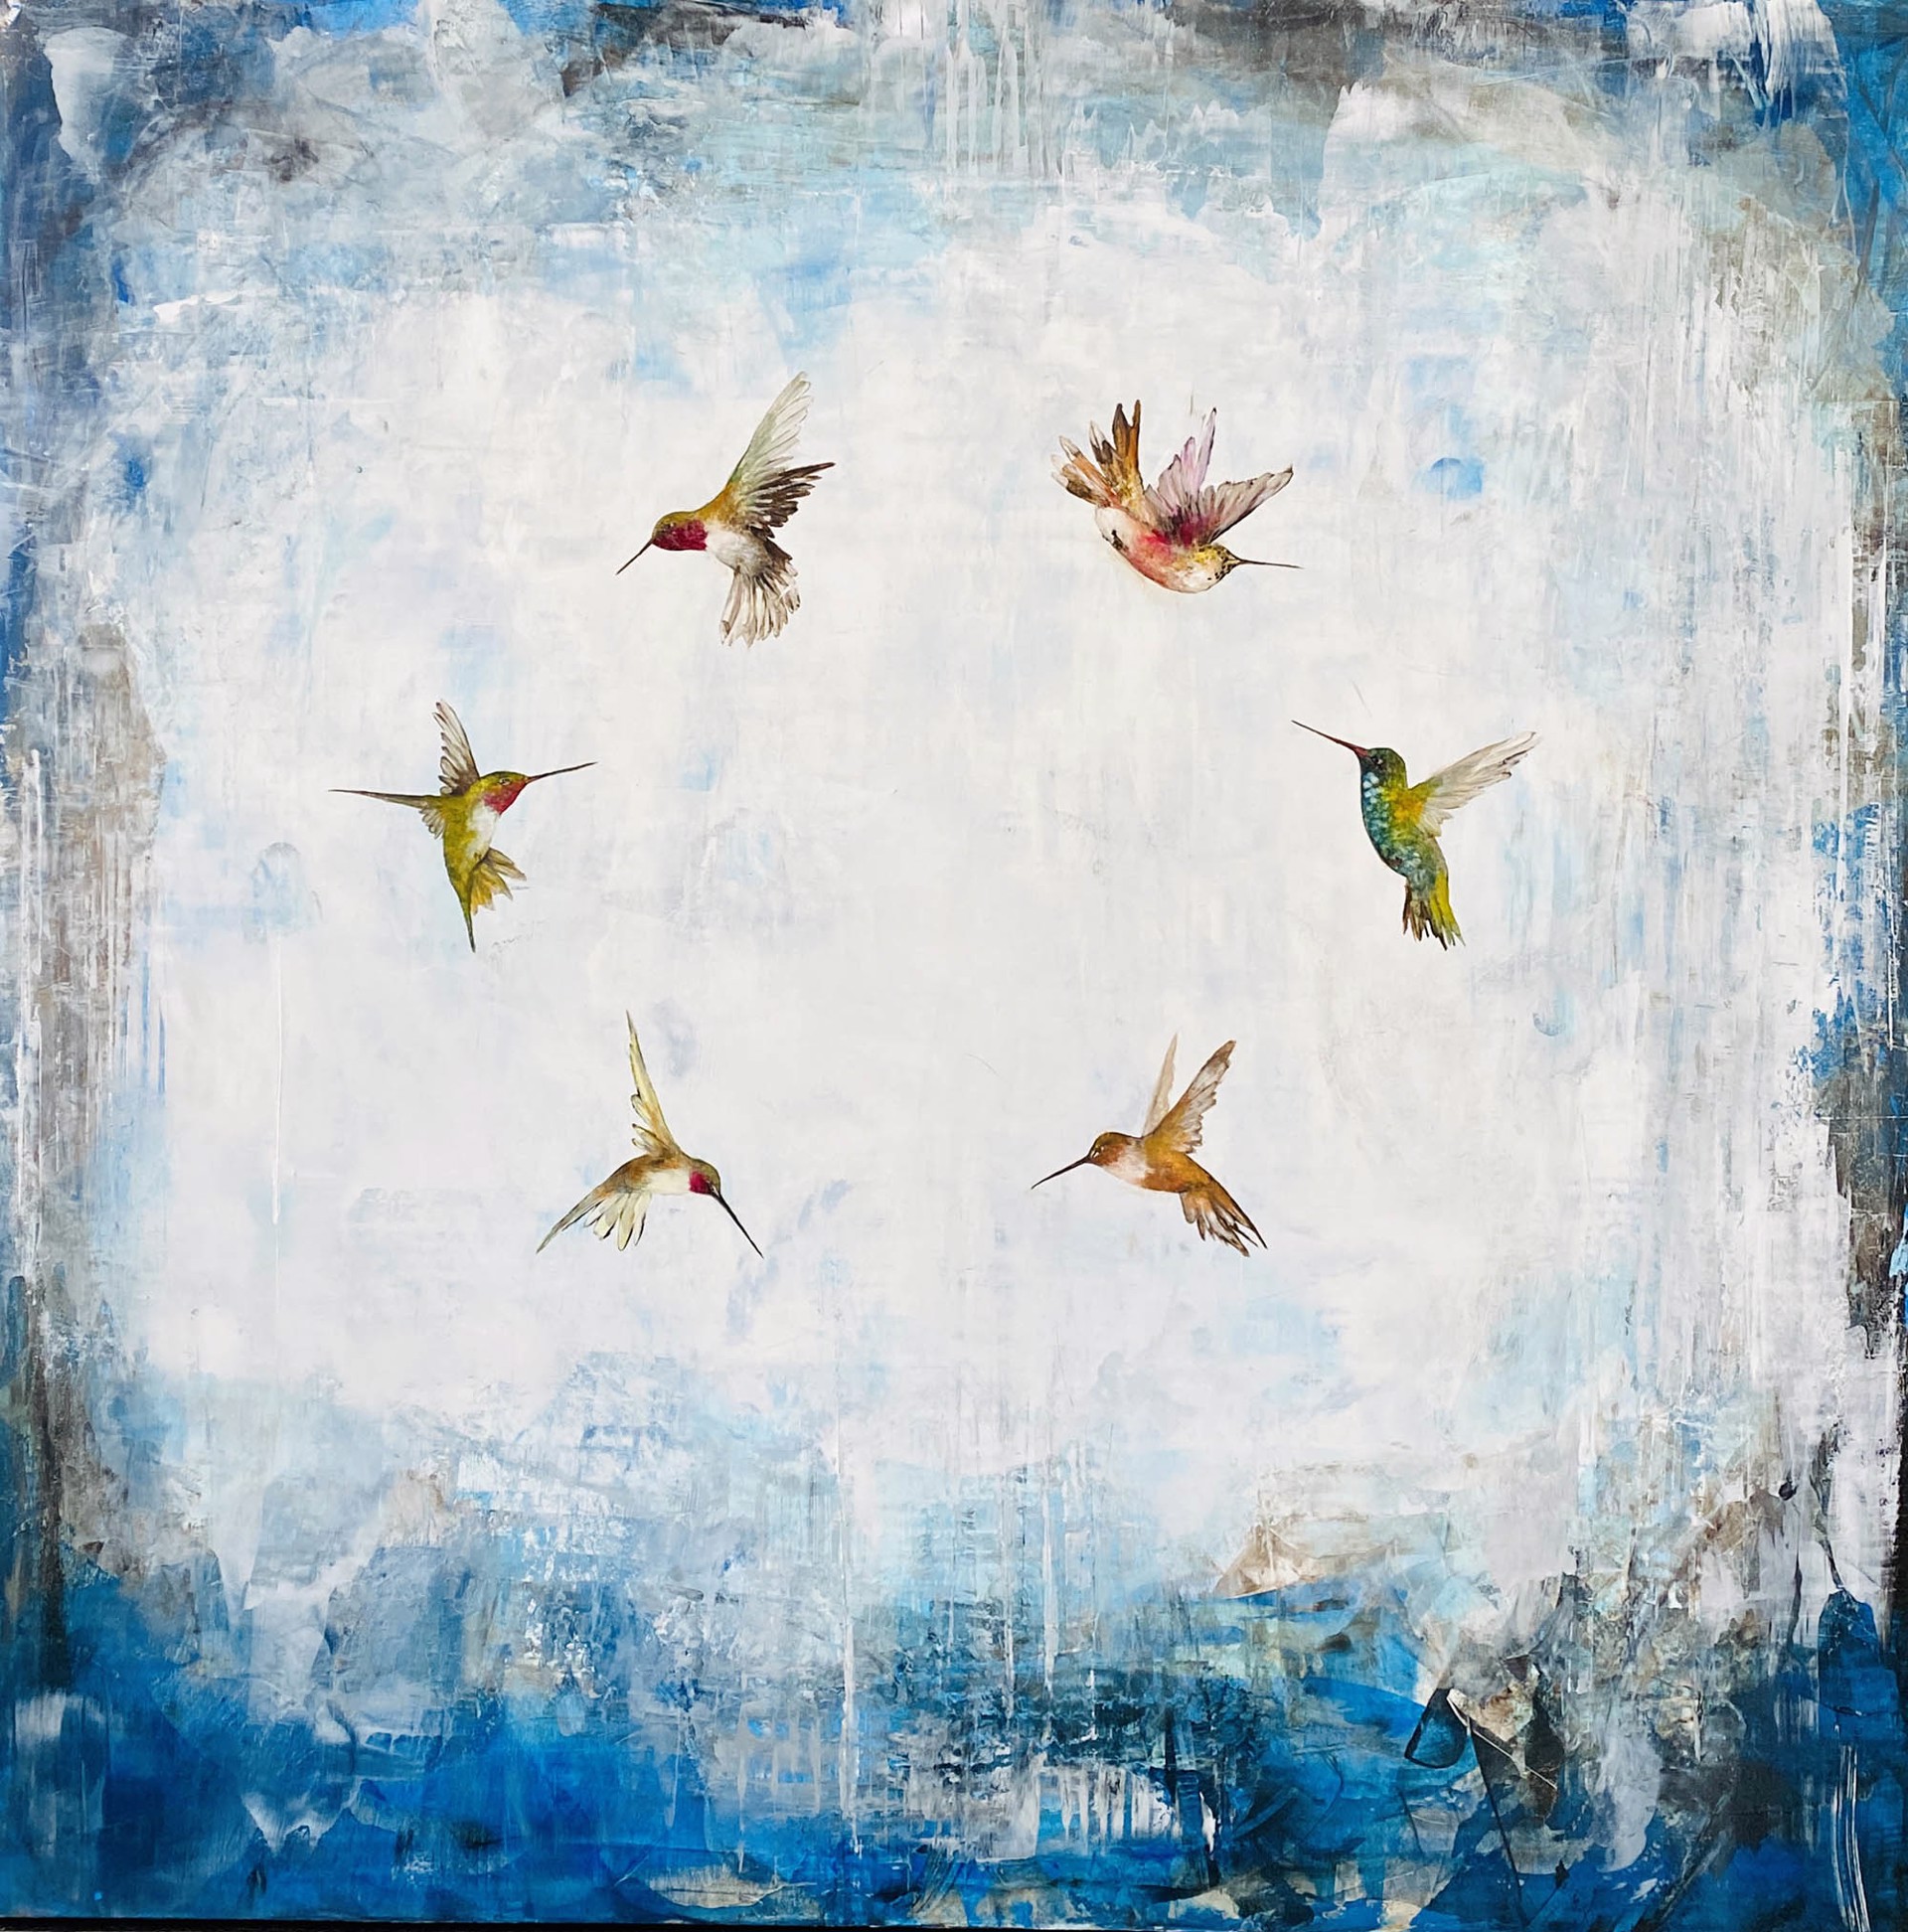 Original Oil Painting Featuring Hummingbirds Flying In A Circle Over Abstract Blue And White Background